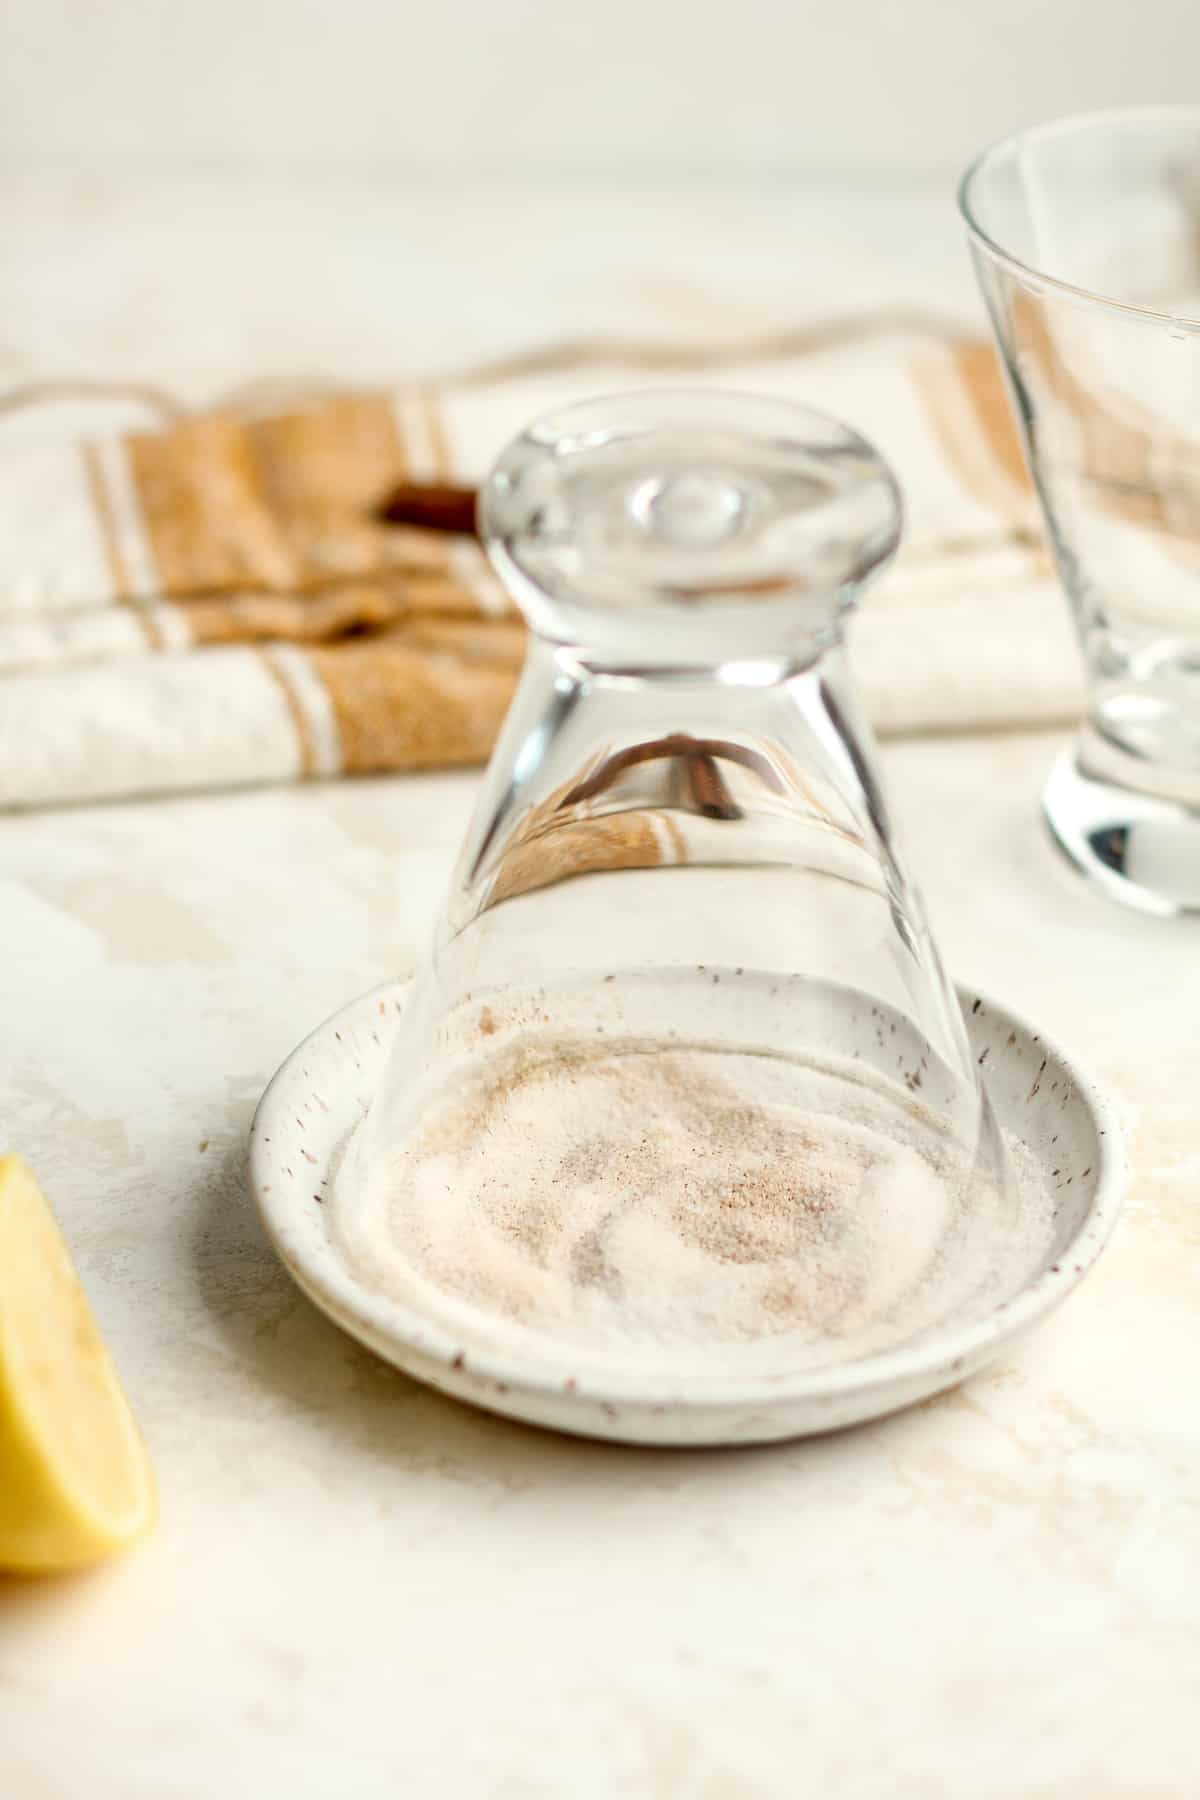 A glass turned upside down in a plate of cinnamon and sugar.